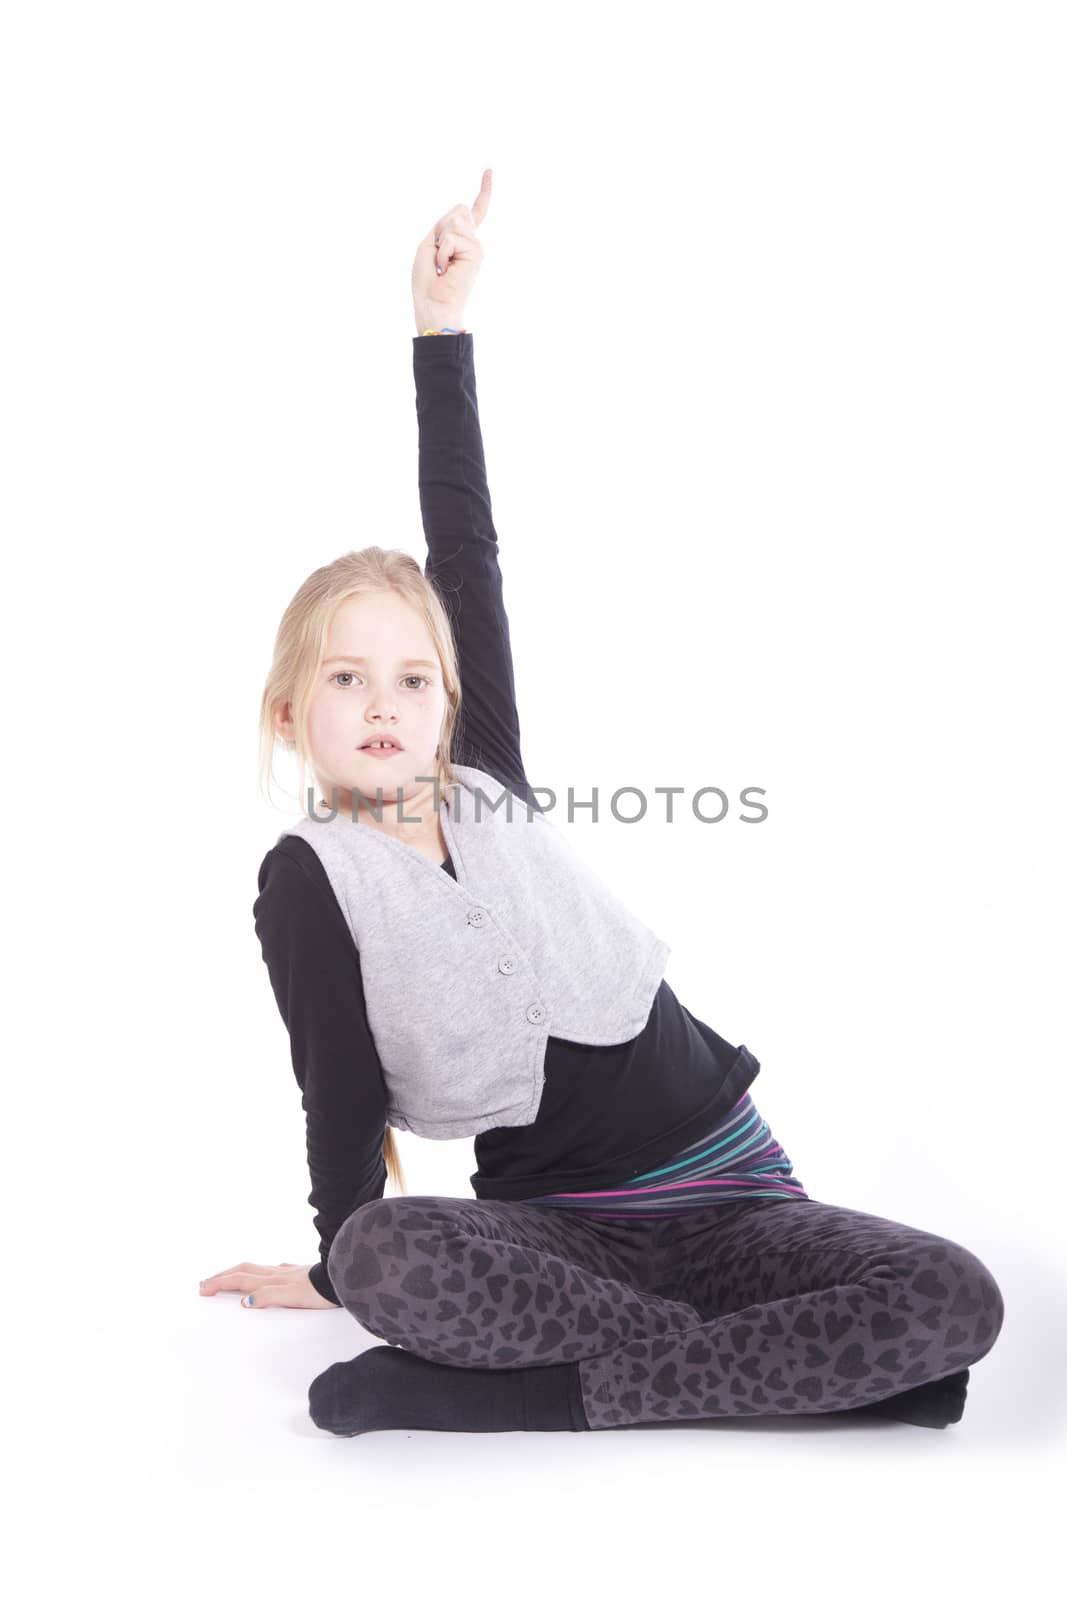 young sitting girl raising her finger to get attention in studio against white background